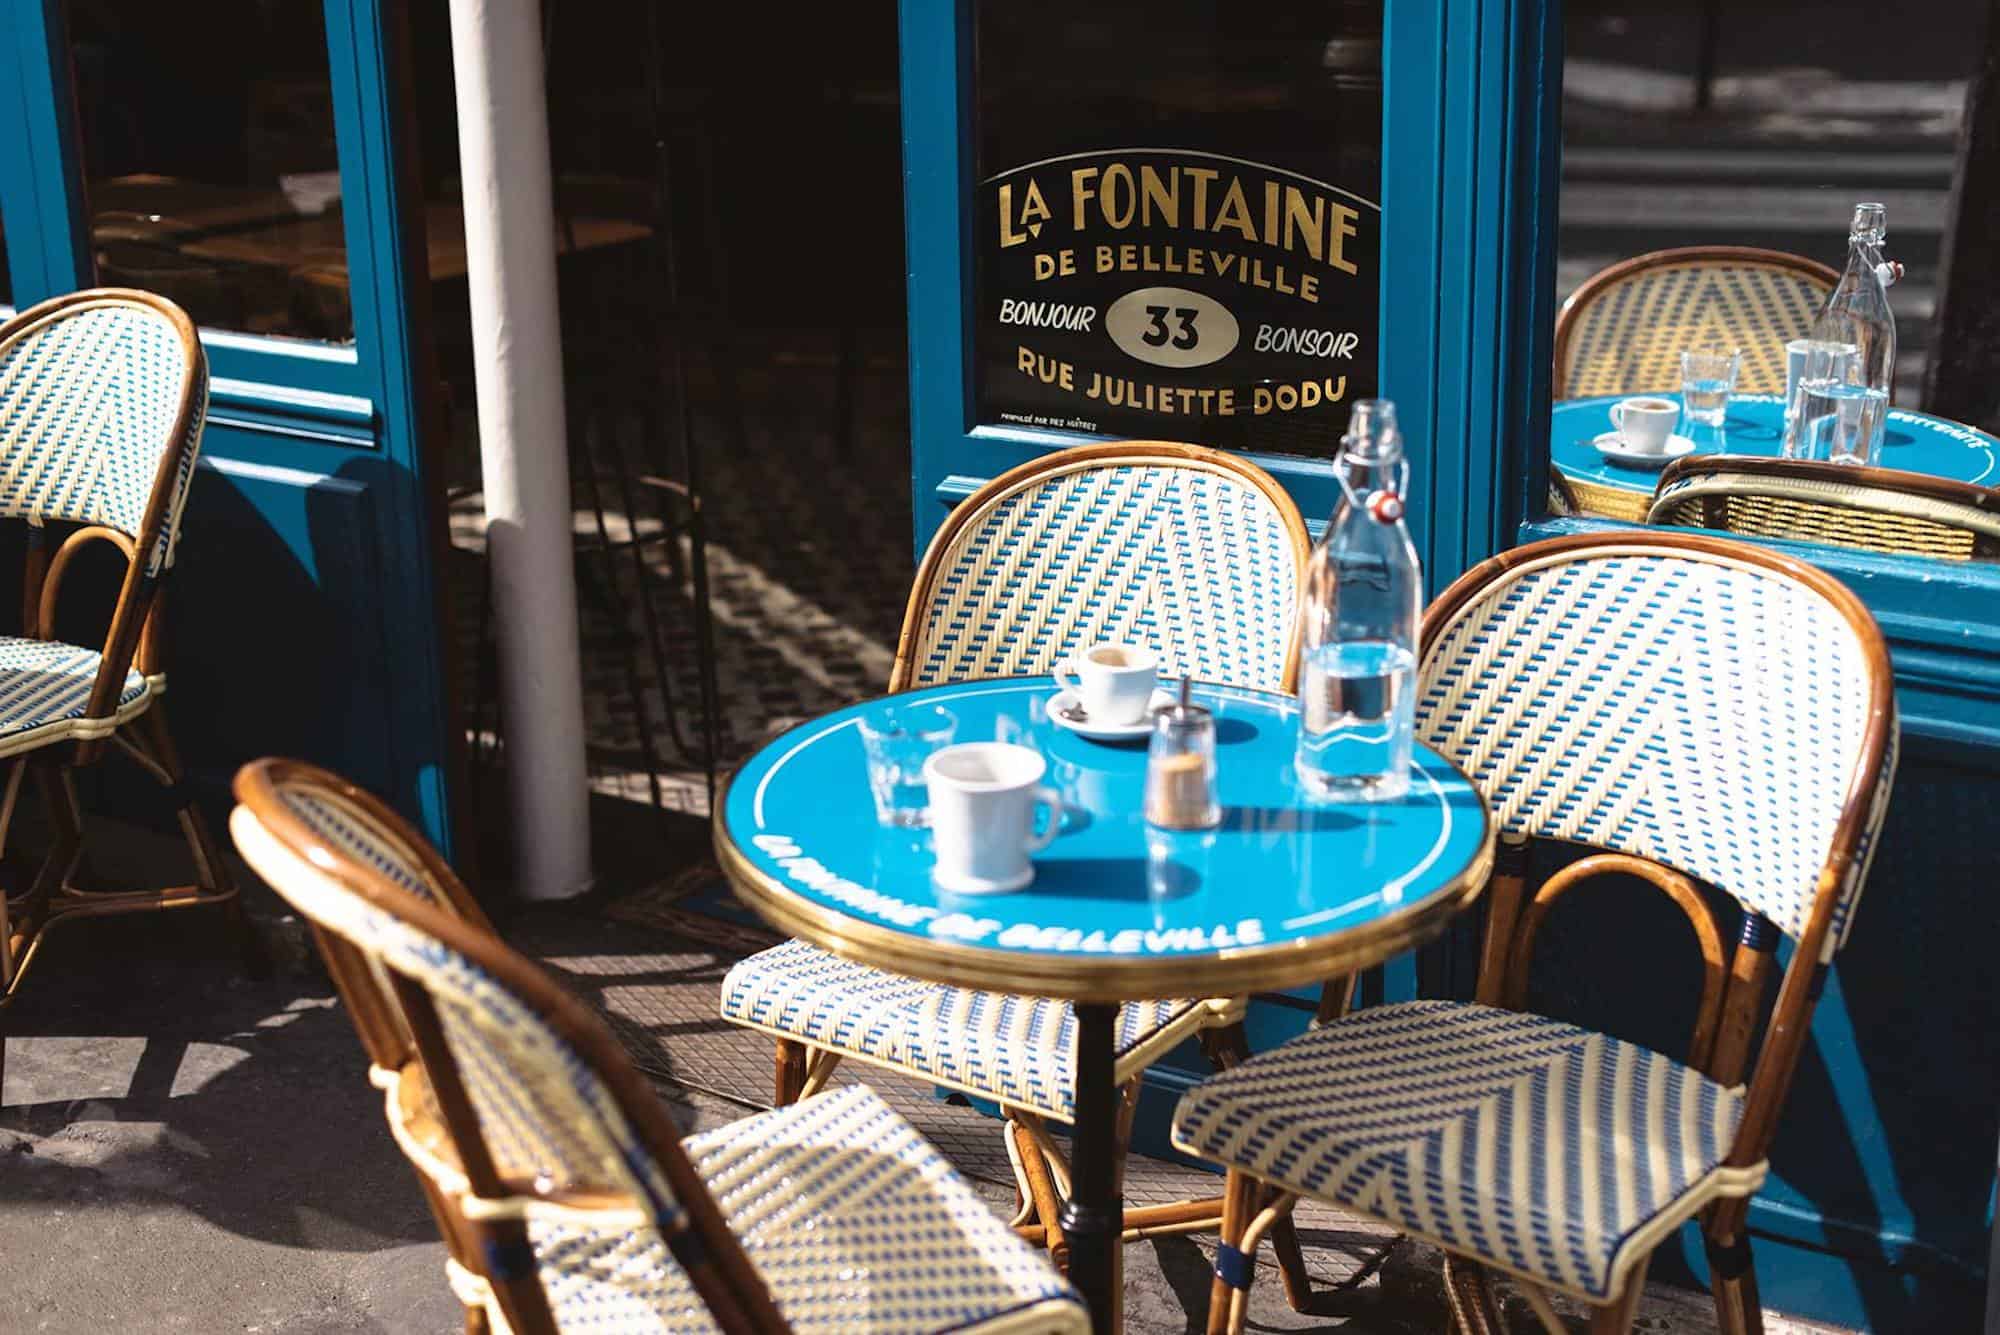 Where to Find the Best Brunch in Paris: Our Top Picks for Brunching in the City